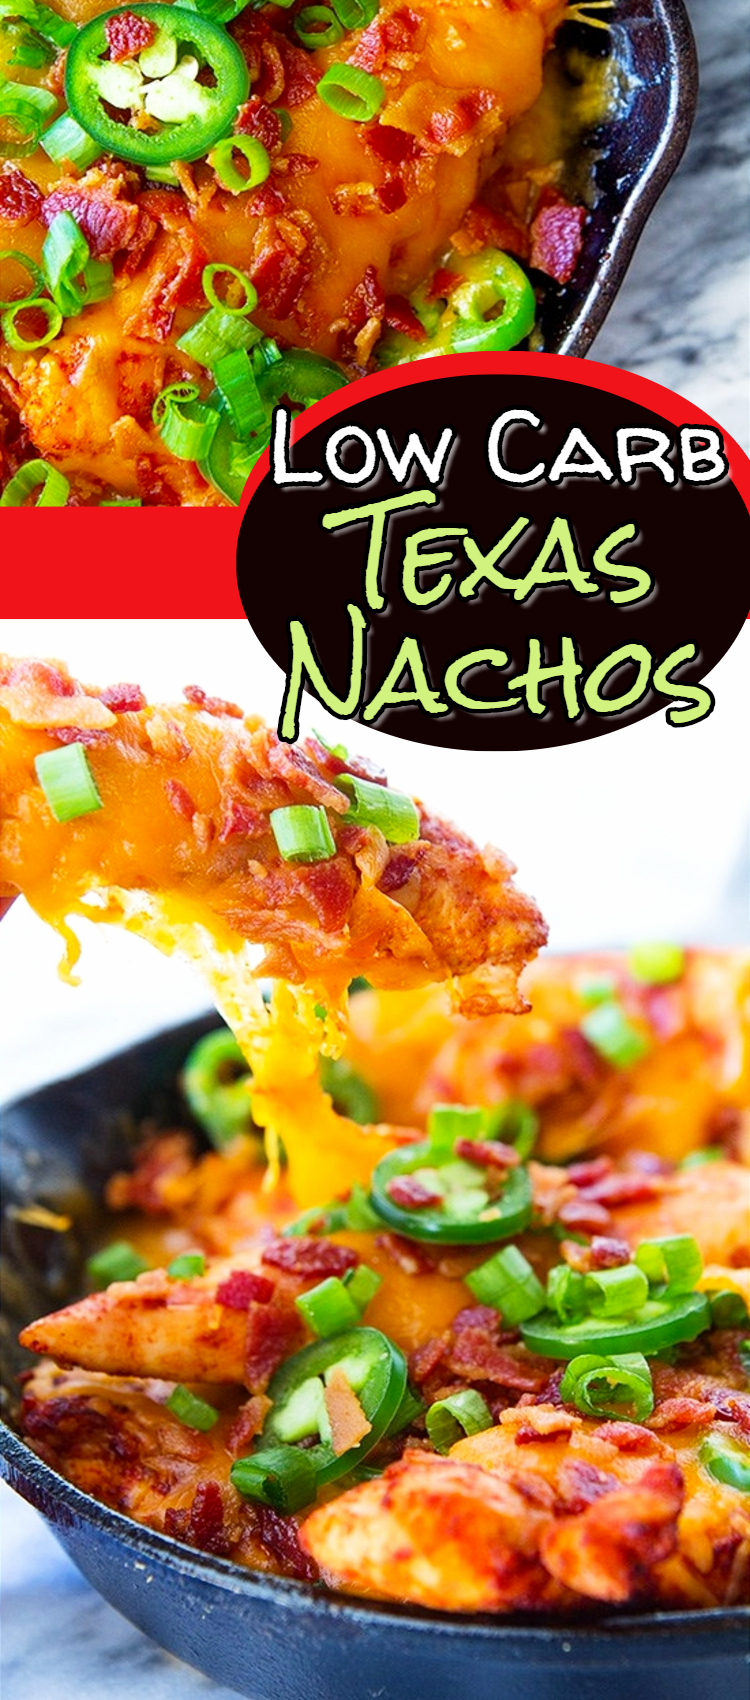 Low Carb Nachos!  Best Low Carb Nacho Recipe on Pinterest- SO delicious!  More low carb comfort recipes on this page 